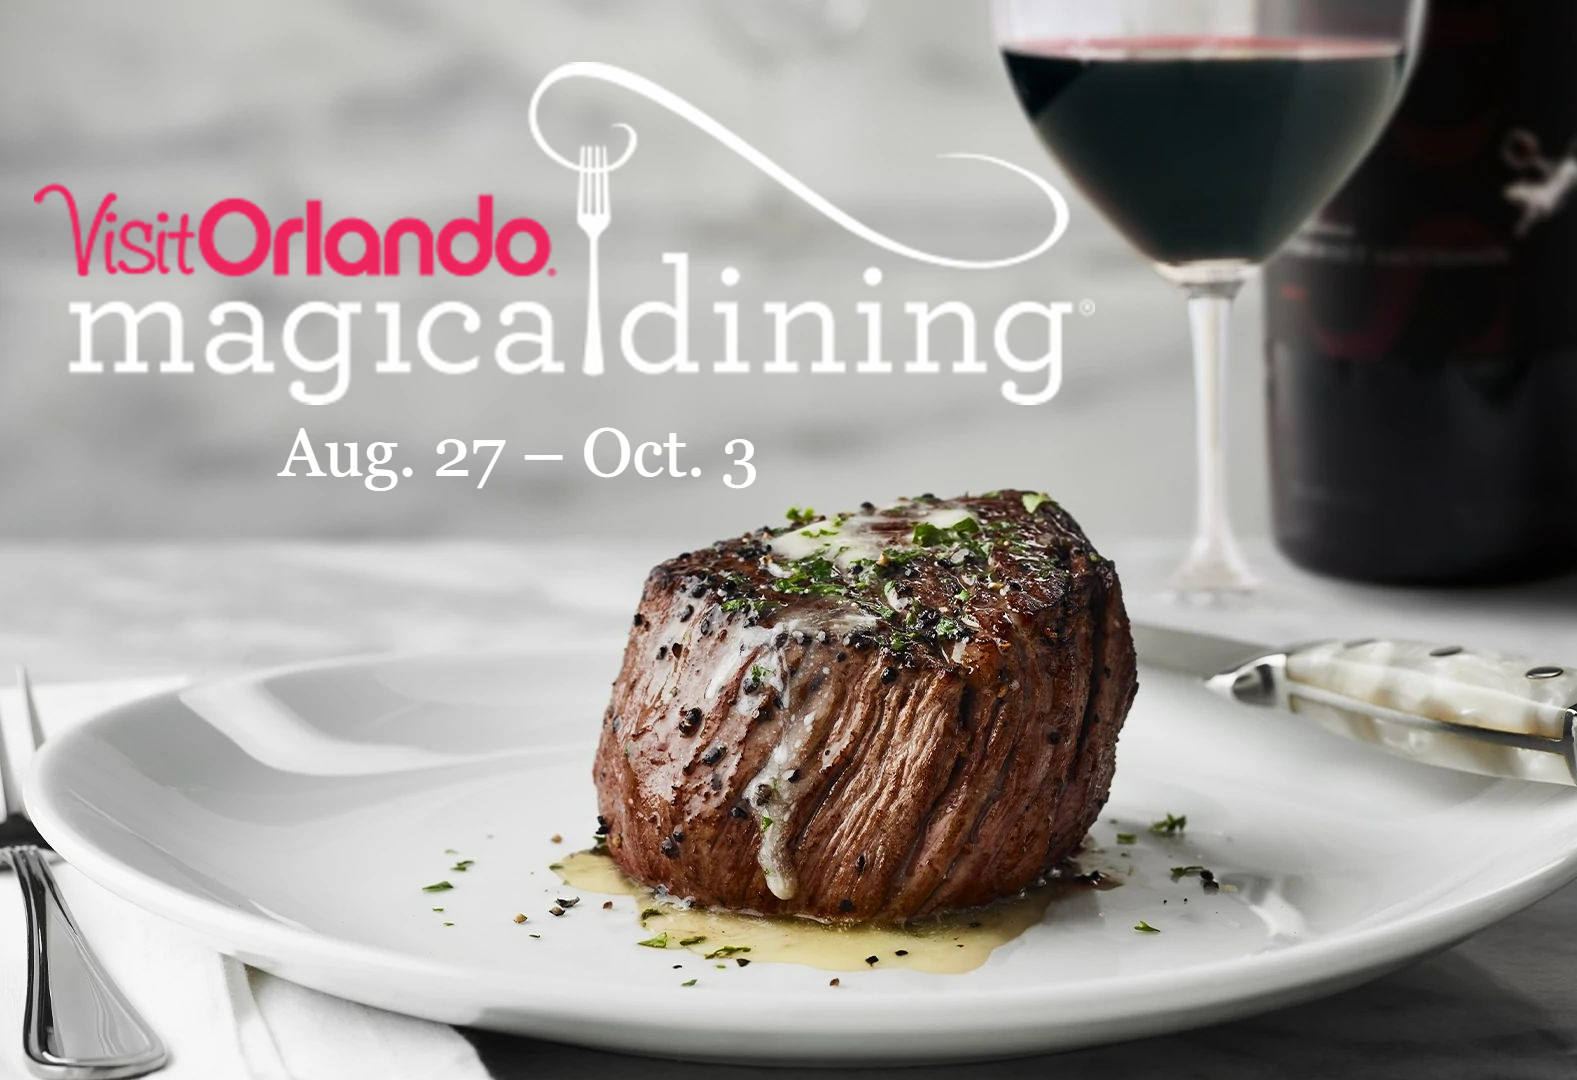 It's time to start planning your picks for Visit Orlando's 16th annual Magical Dining